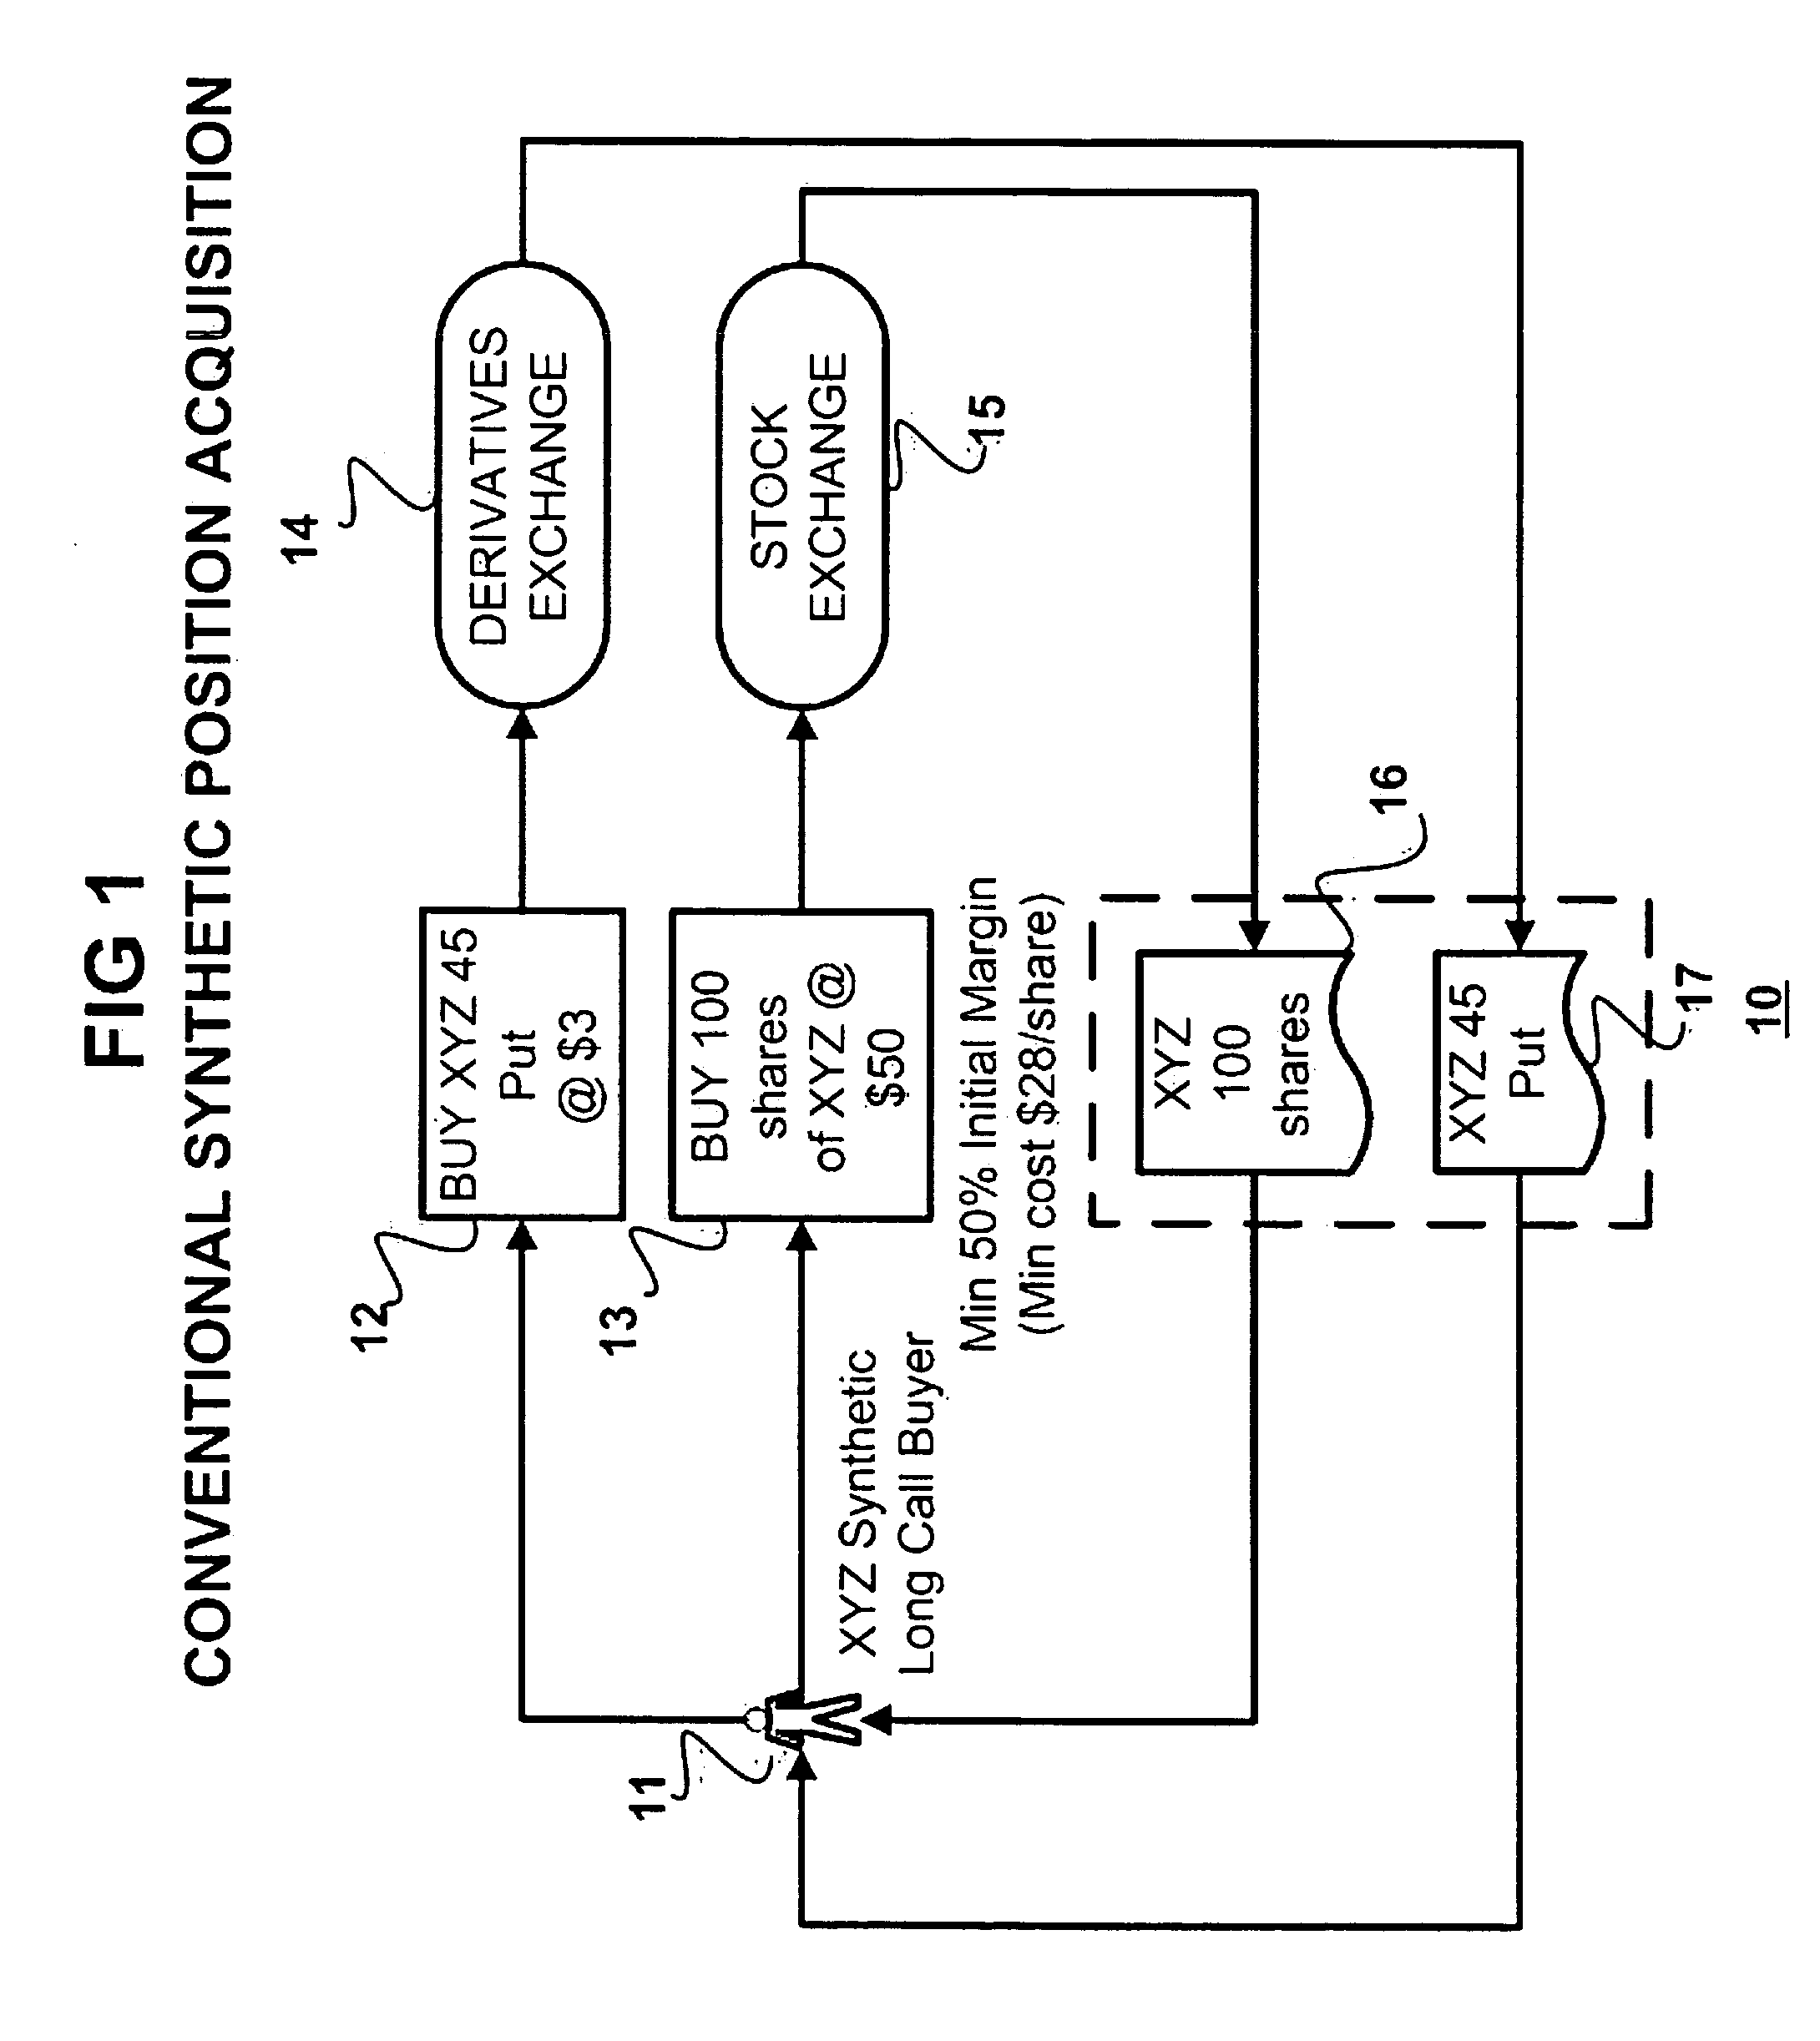 Automated method and system for market making, centralized margin facility and clearing of synthetic orders